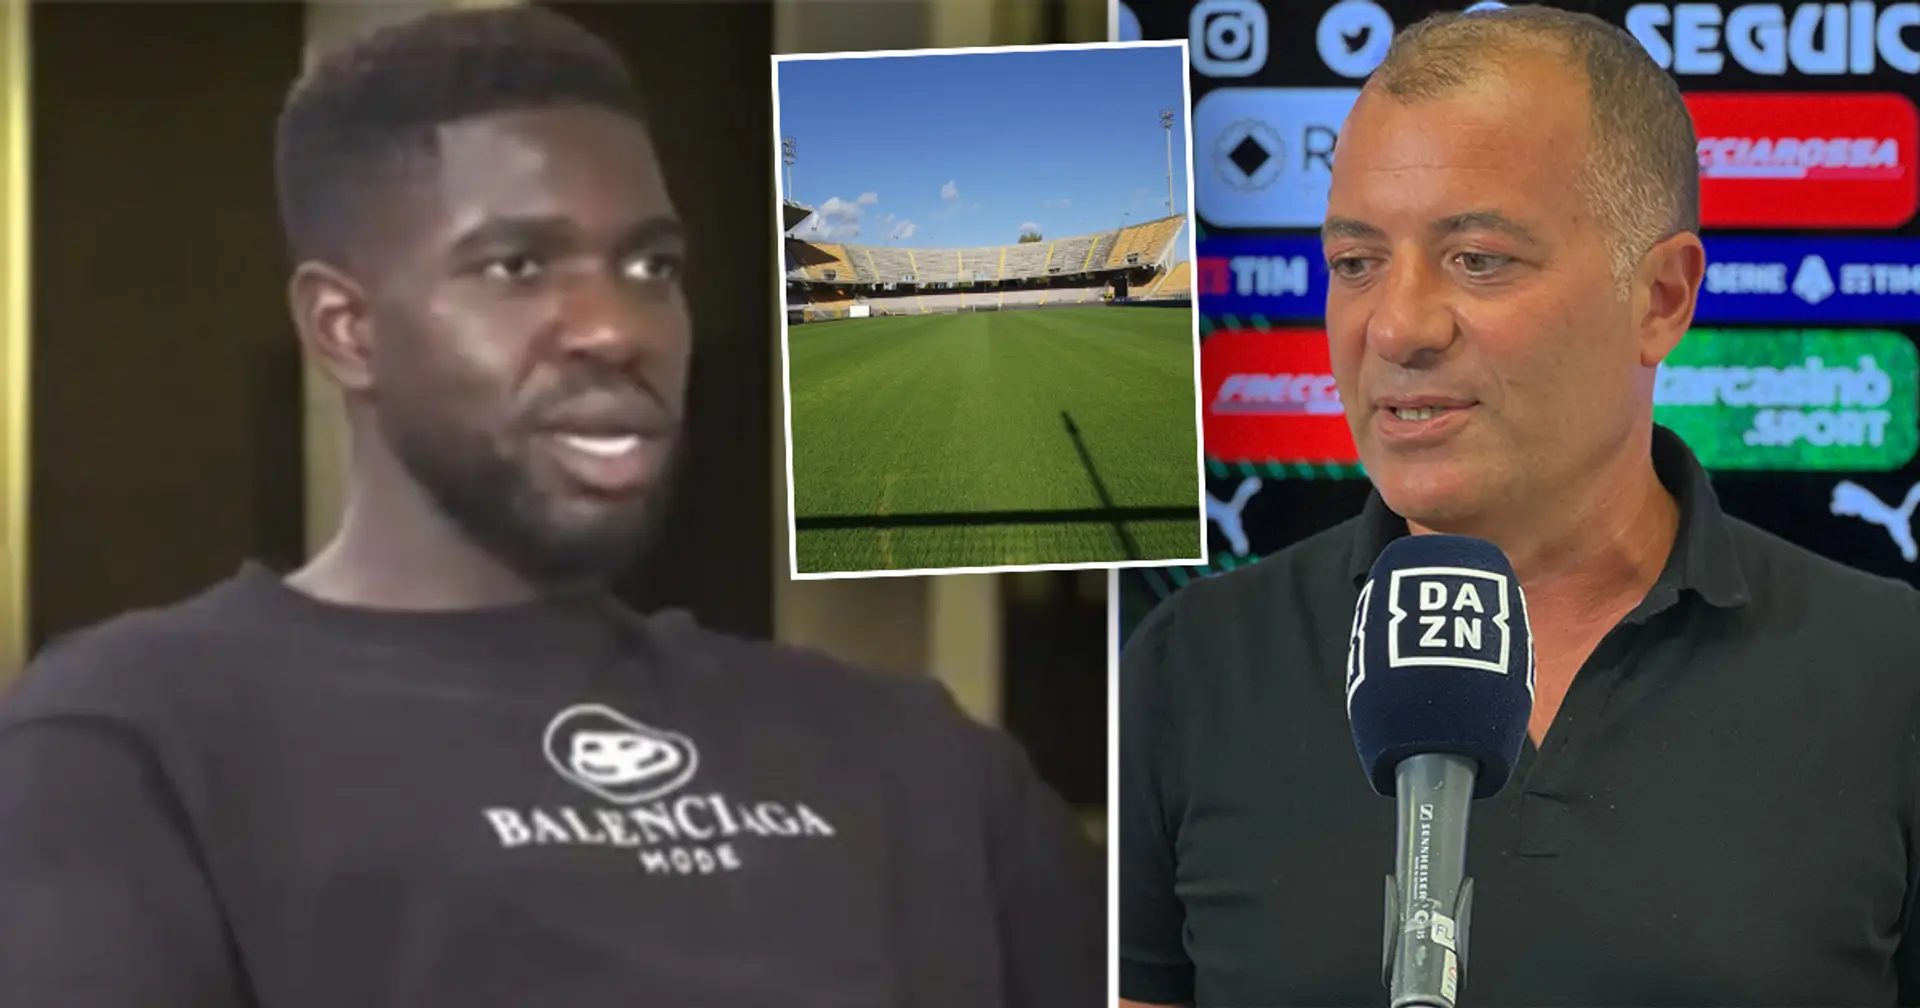 Lecce president confirms Umtiti talks, surprising reason behind player's desire to join them named